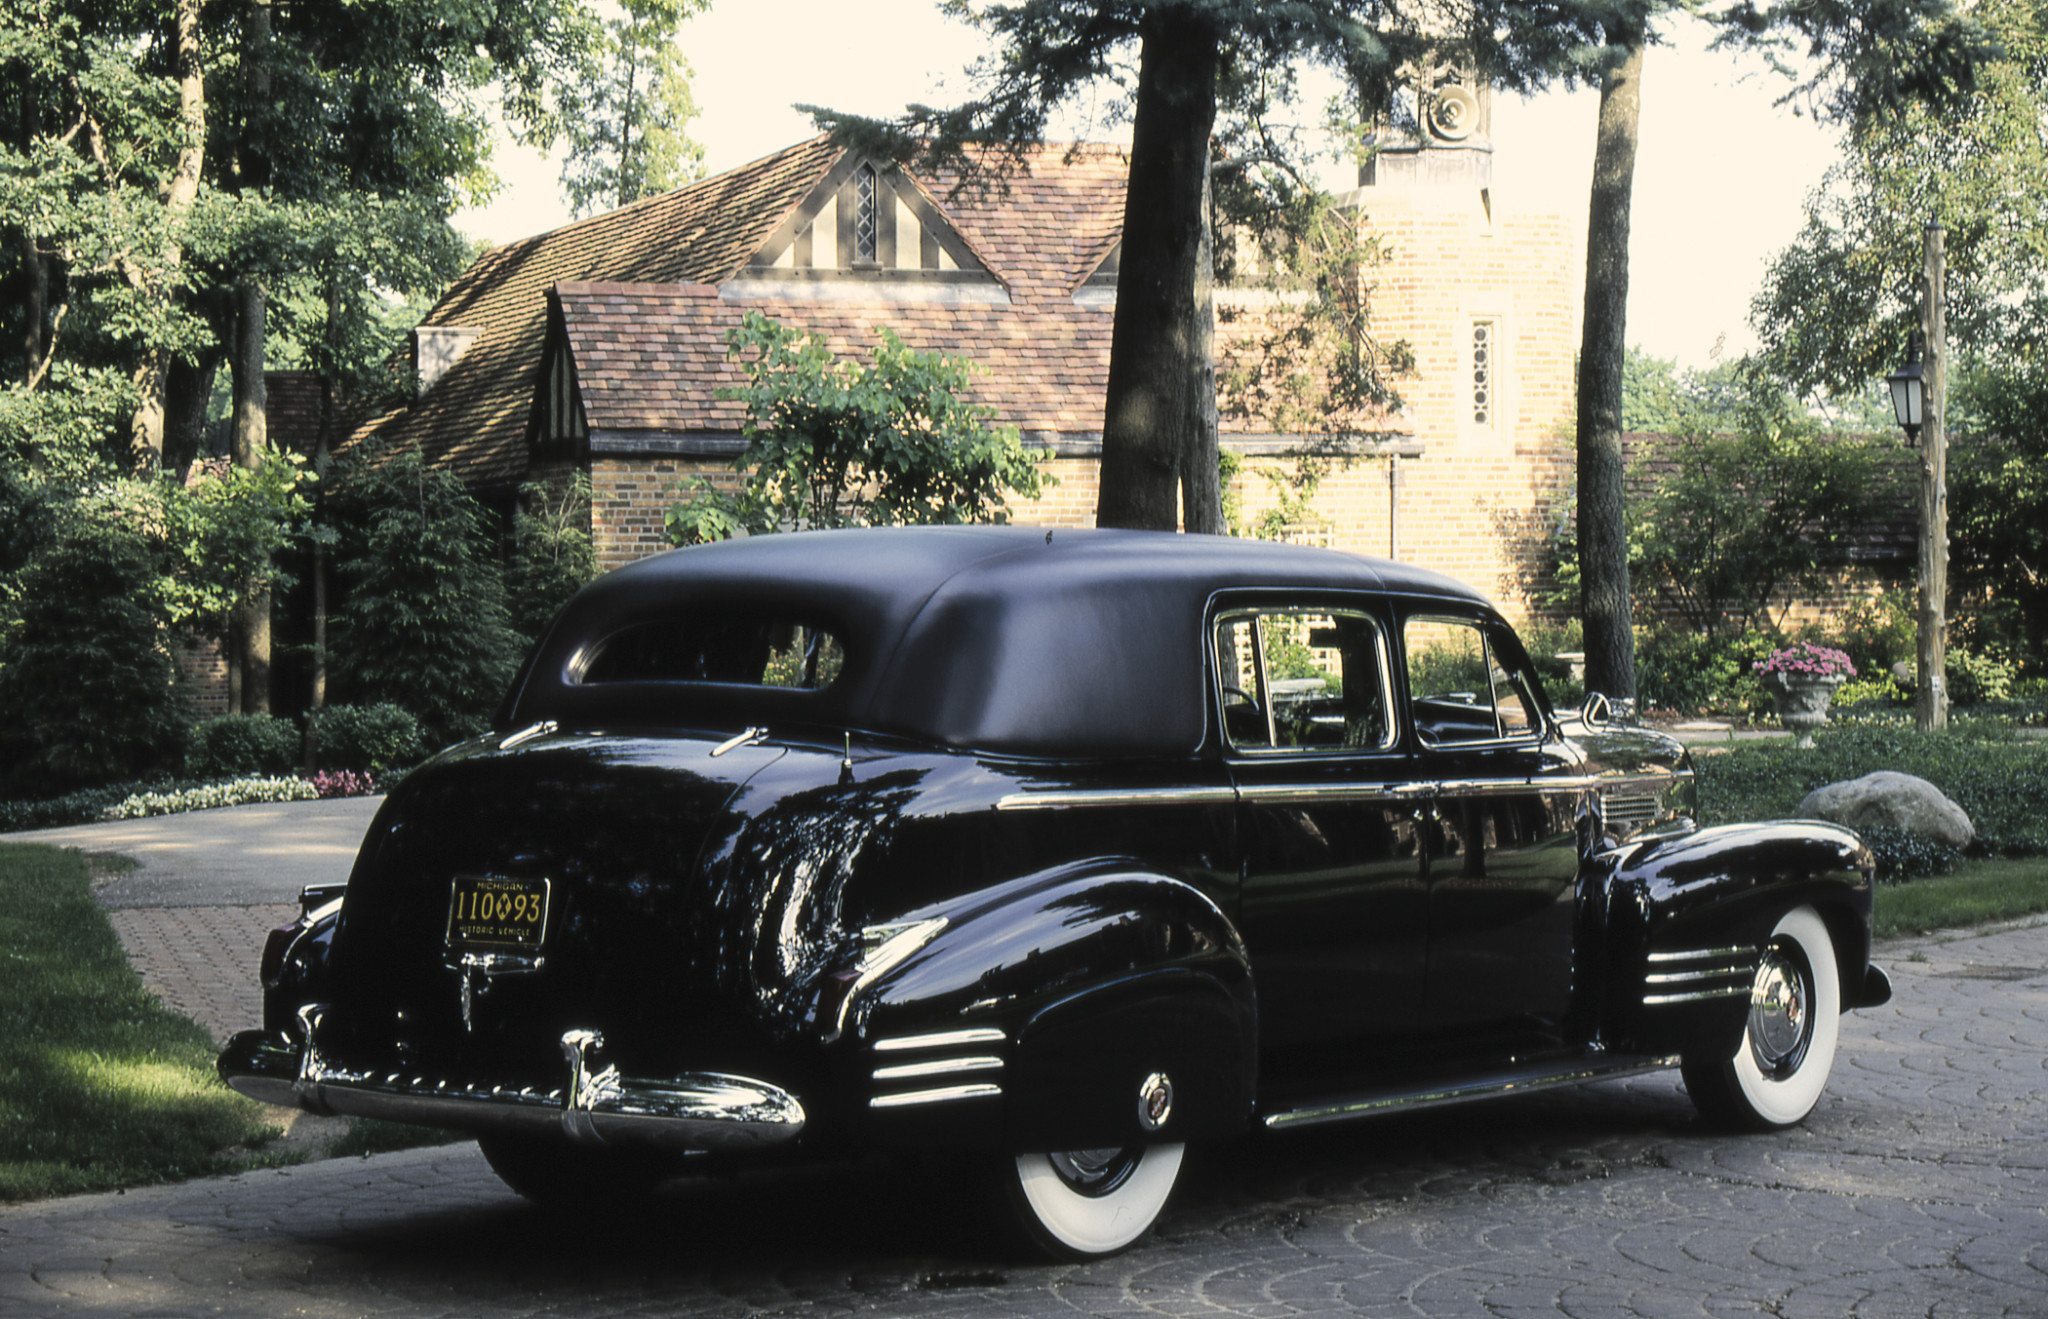 1941 Cadillac Fleetwood Series 75 Limousine model 33F Rear View